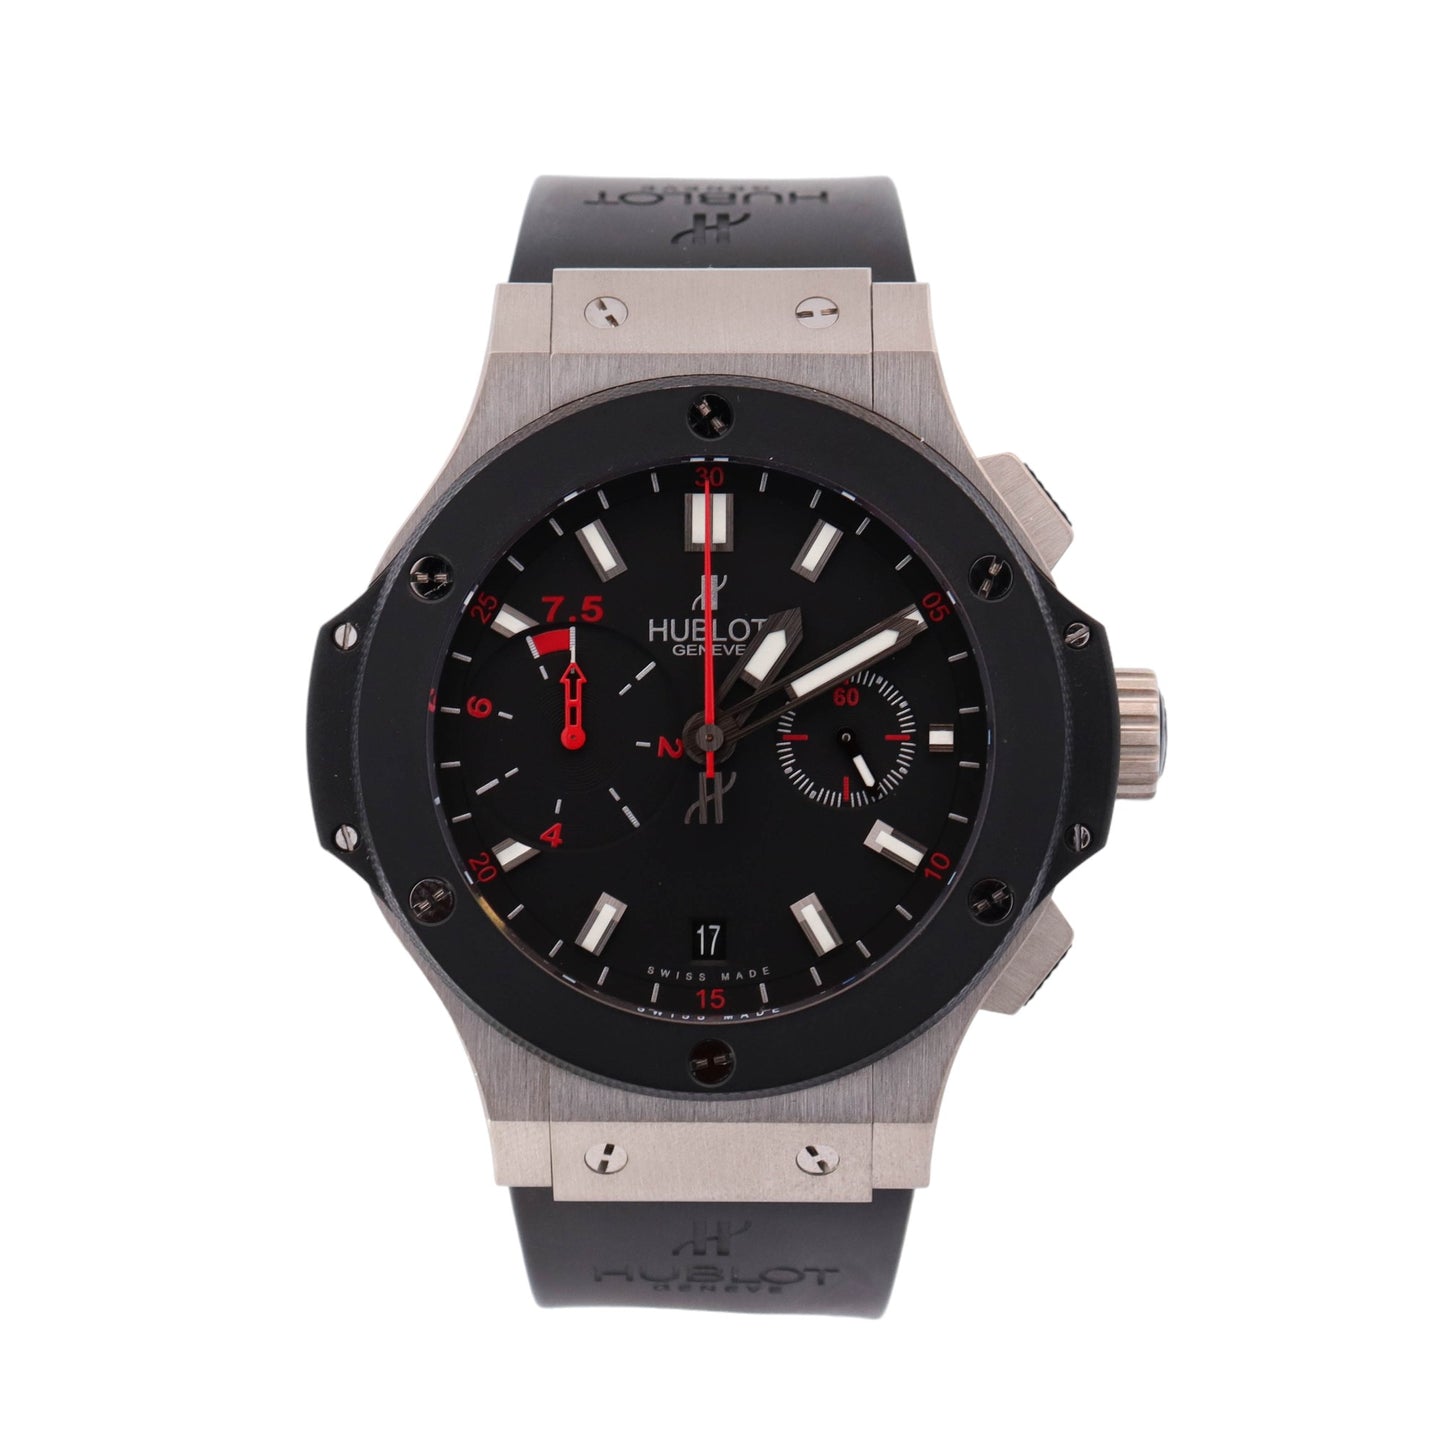 Hublot Big Bang Chukker Bang Stainless Steel 44mm Black Chronograph Dial Watch Reference# 317.NM.1137.VR - Happy Jewelers Fine Jewelry Lifetime Warranty